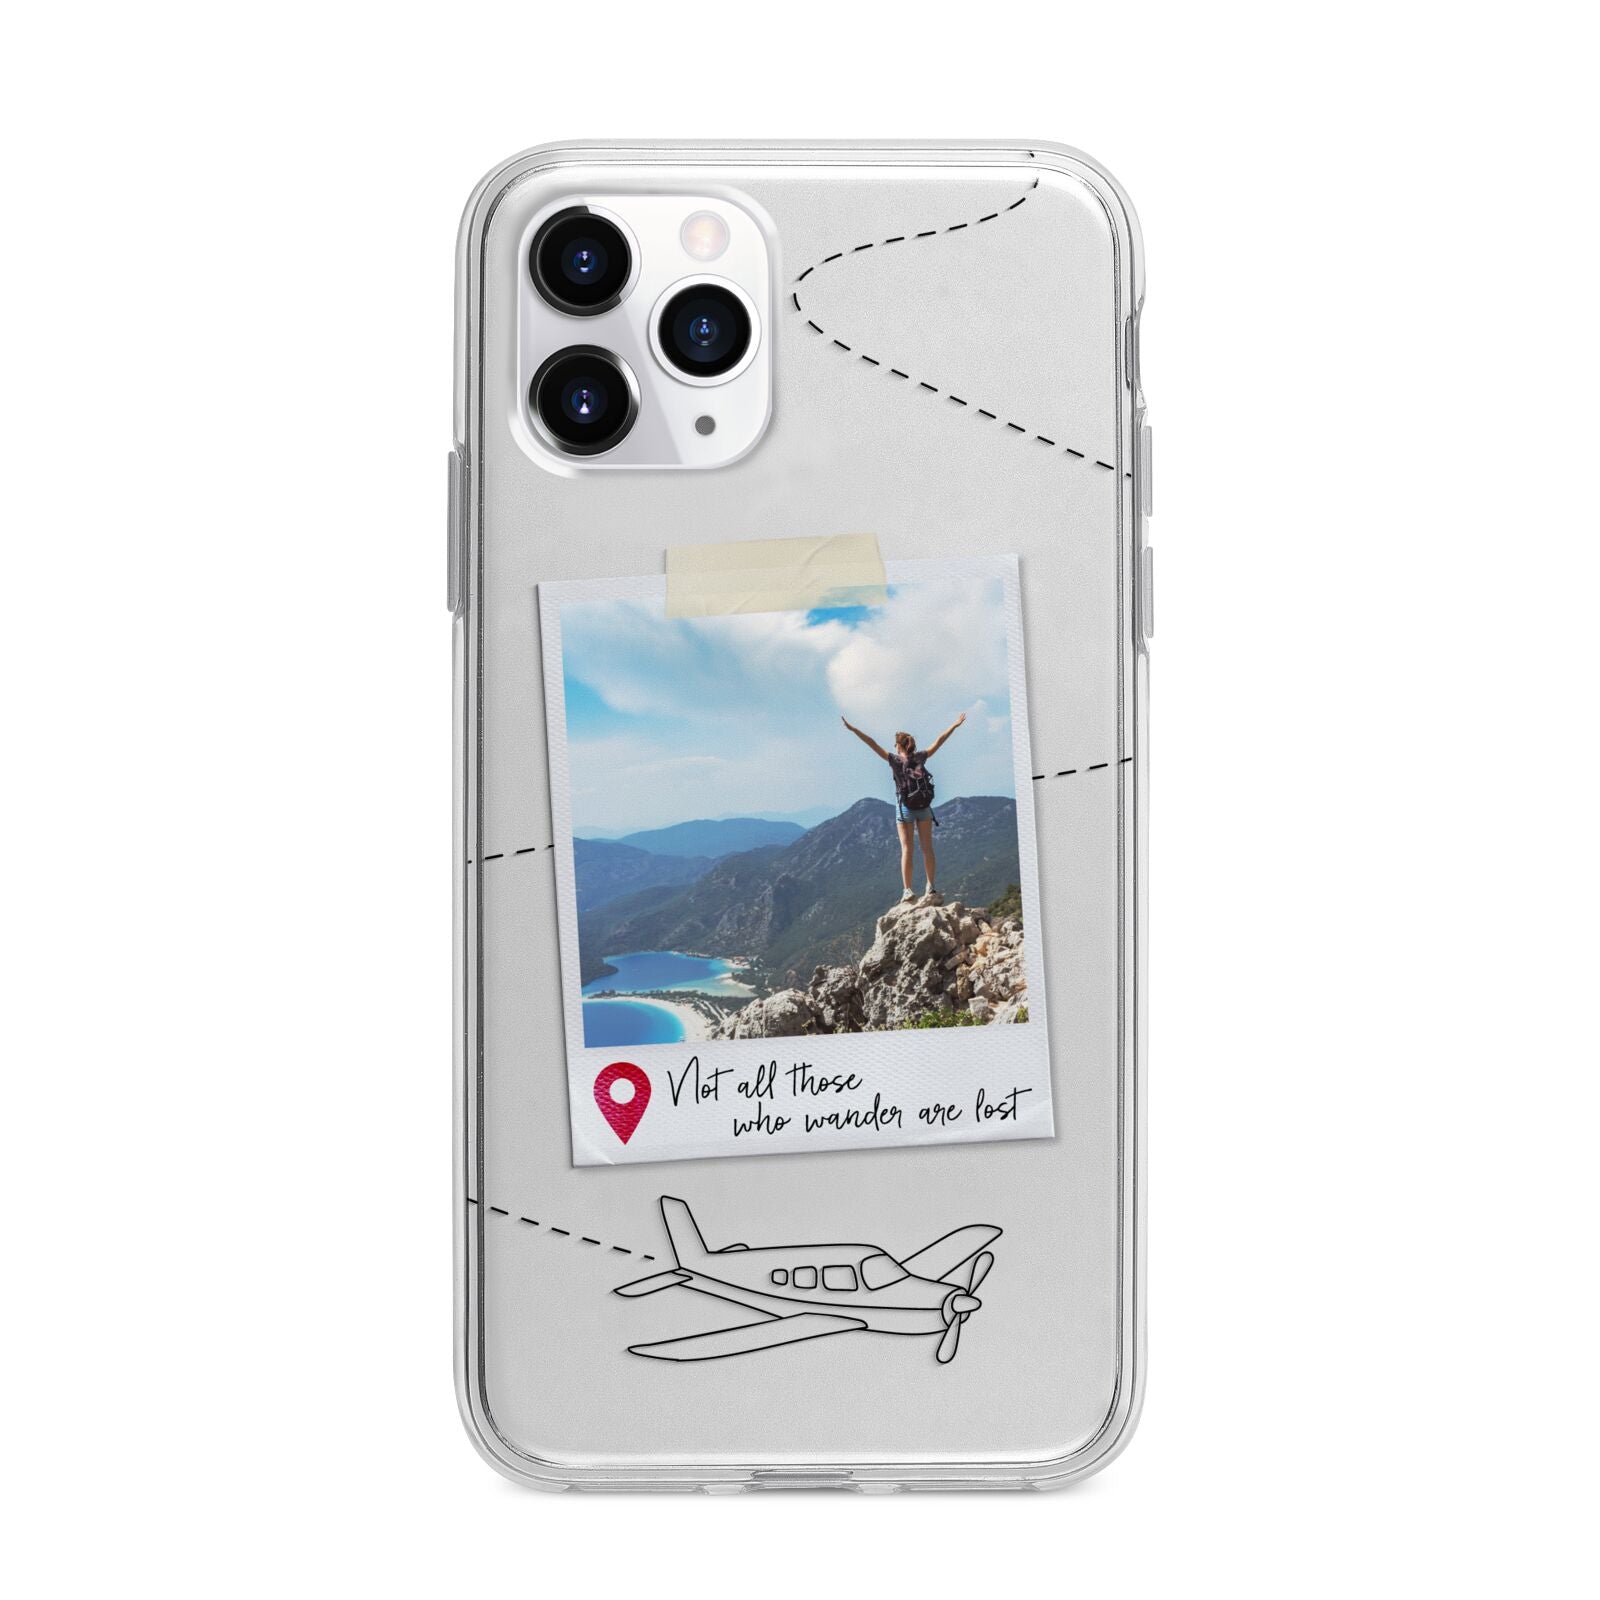 Backpacker Photo Upload Personalised Apple iPhone 11 Pro Max in Silver with Bumper Case